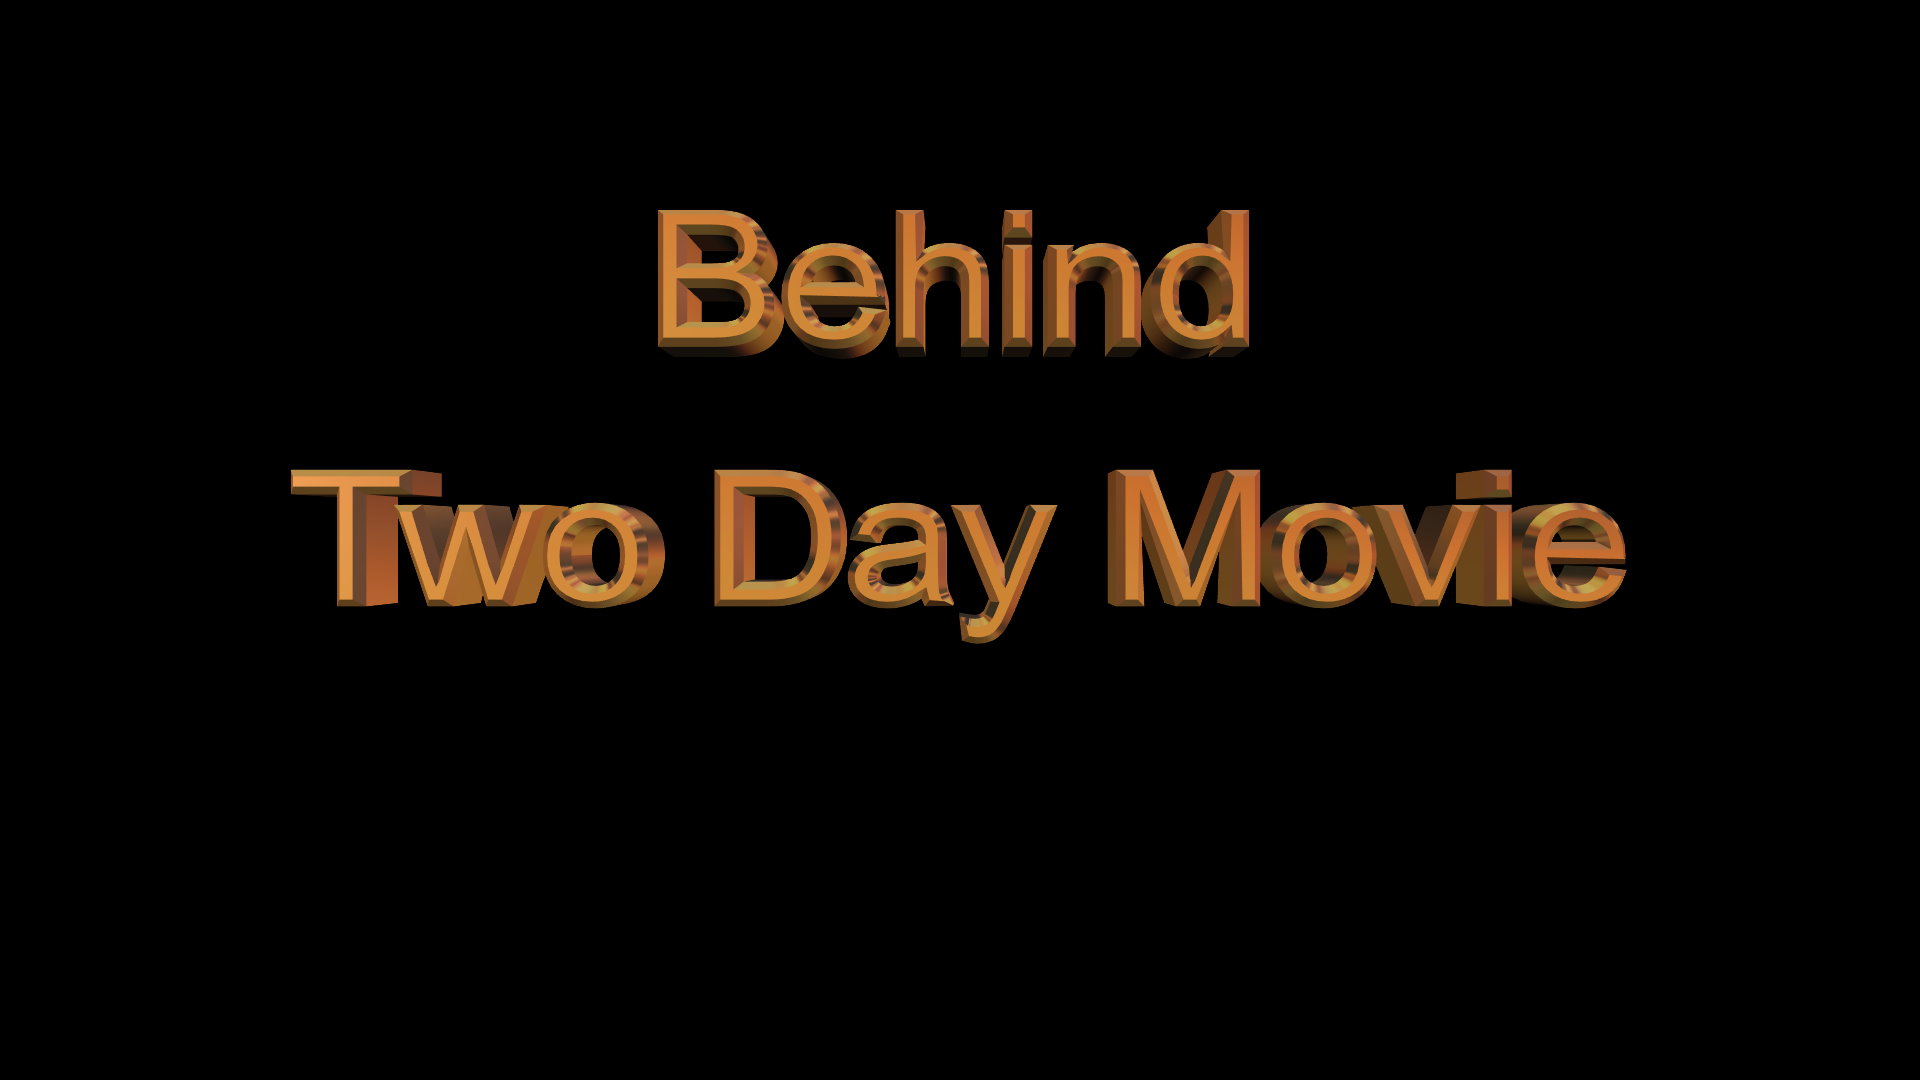 Behind Two Day Movie